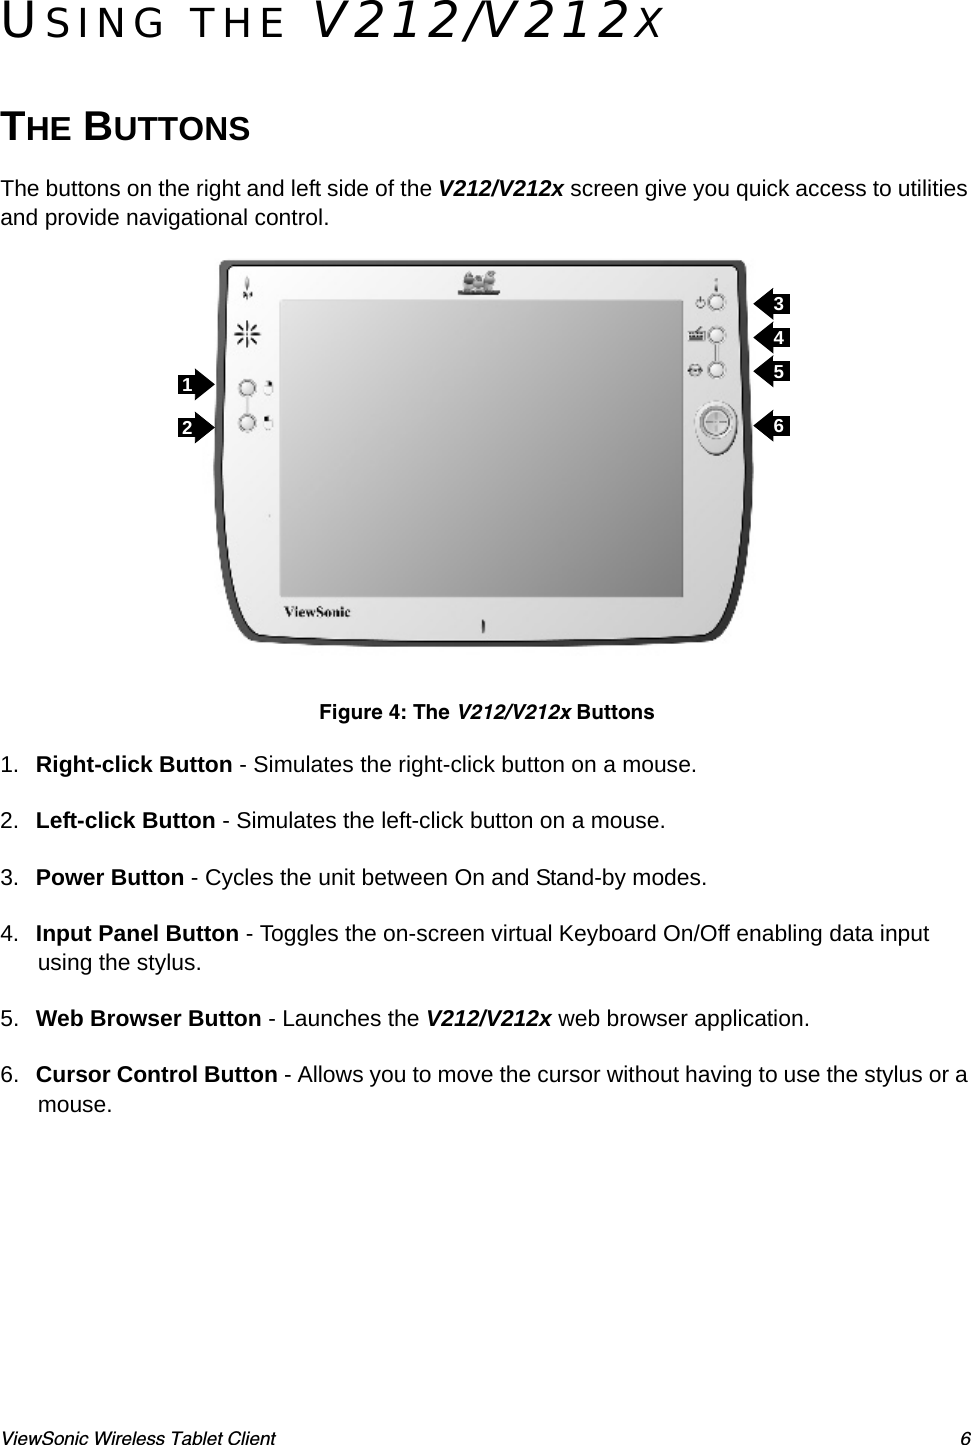 ViewSonic Wireless Tablet Client 6USING THE V212/V212XTHE BUTTONSThe buttons on the right and left side of the V212/V212x screen give you quick access to utilities and provide navigational control. Figure 4: The V212/V212x Buttons1. Right-click Button - Simulates the right-click button on a mouse.2. Left-click Button - Simulates the left-click button on a mouse.3. Power Button - Cycles the unit between On and Stand-by modes.4. Input Panel Button - Toggles the on-screen virtual Keyboard On/Off enabling data input using the stylus.5. Web Browser Button - Launches the V212/V212x web browser application.6. Cursor Control Button - Allows you to move the cursor without having to use the stylus or a mouse.123456